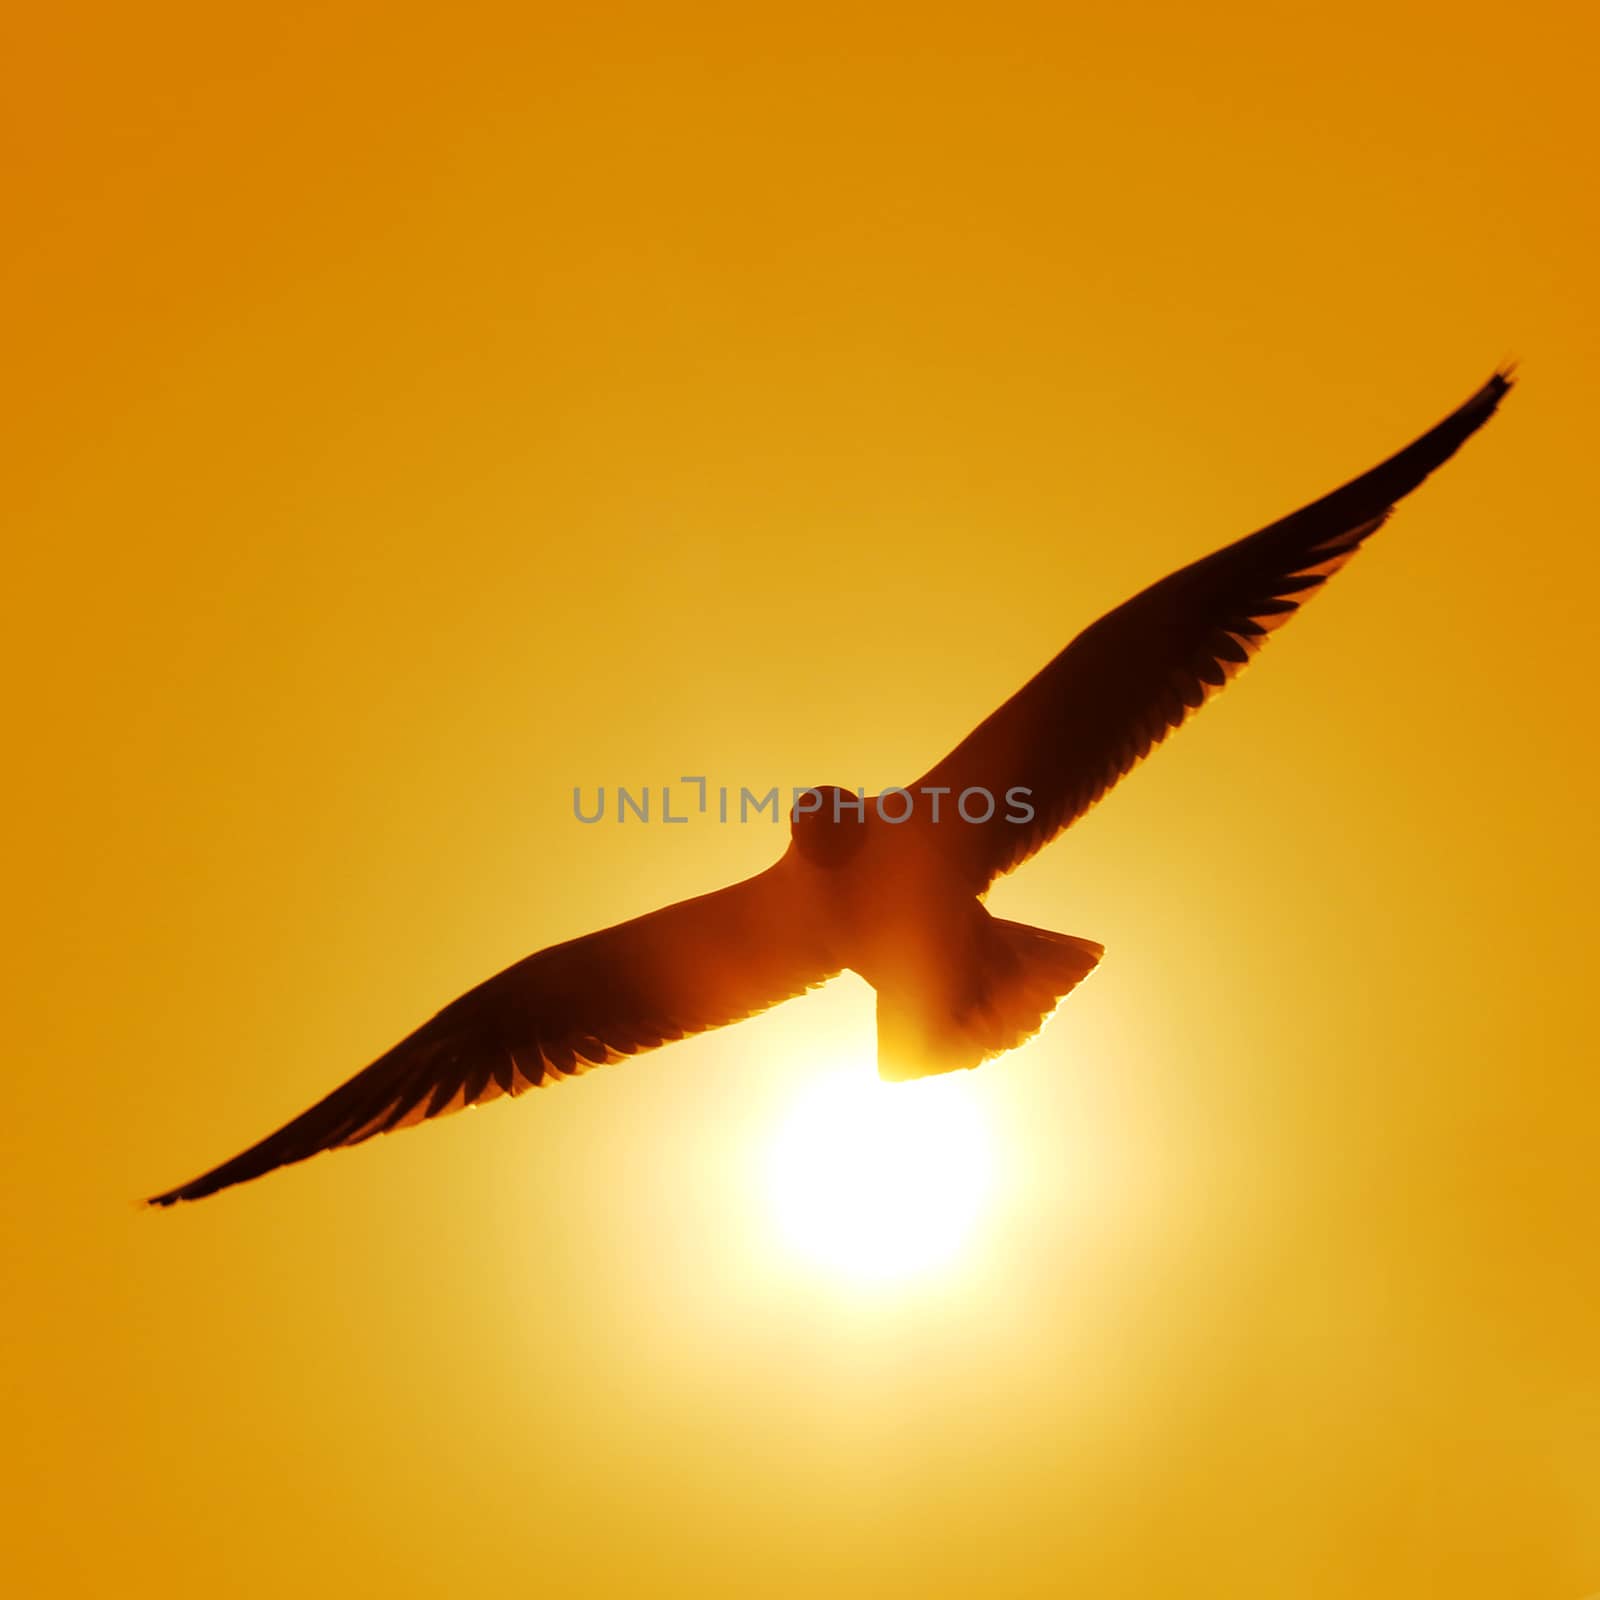 The silhouette of flying seagull